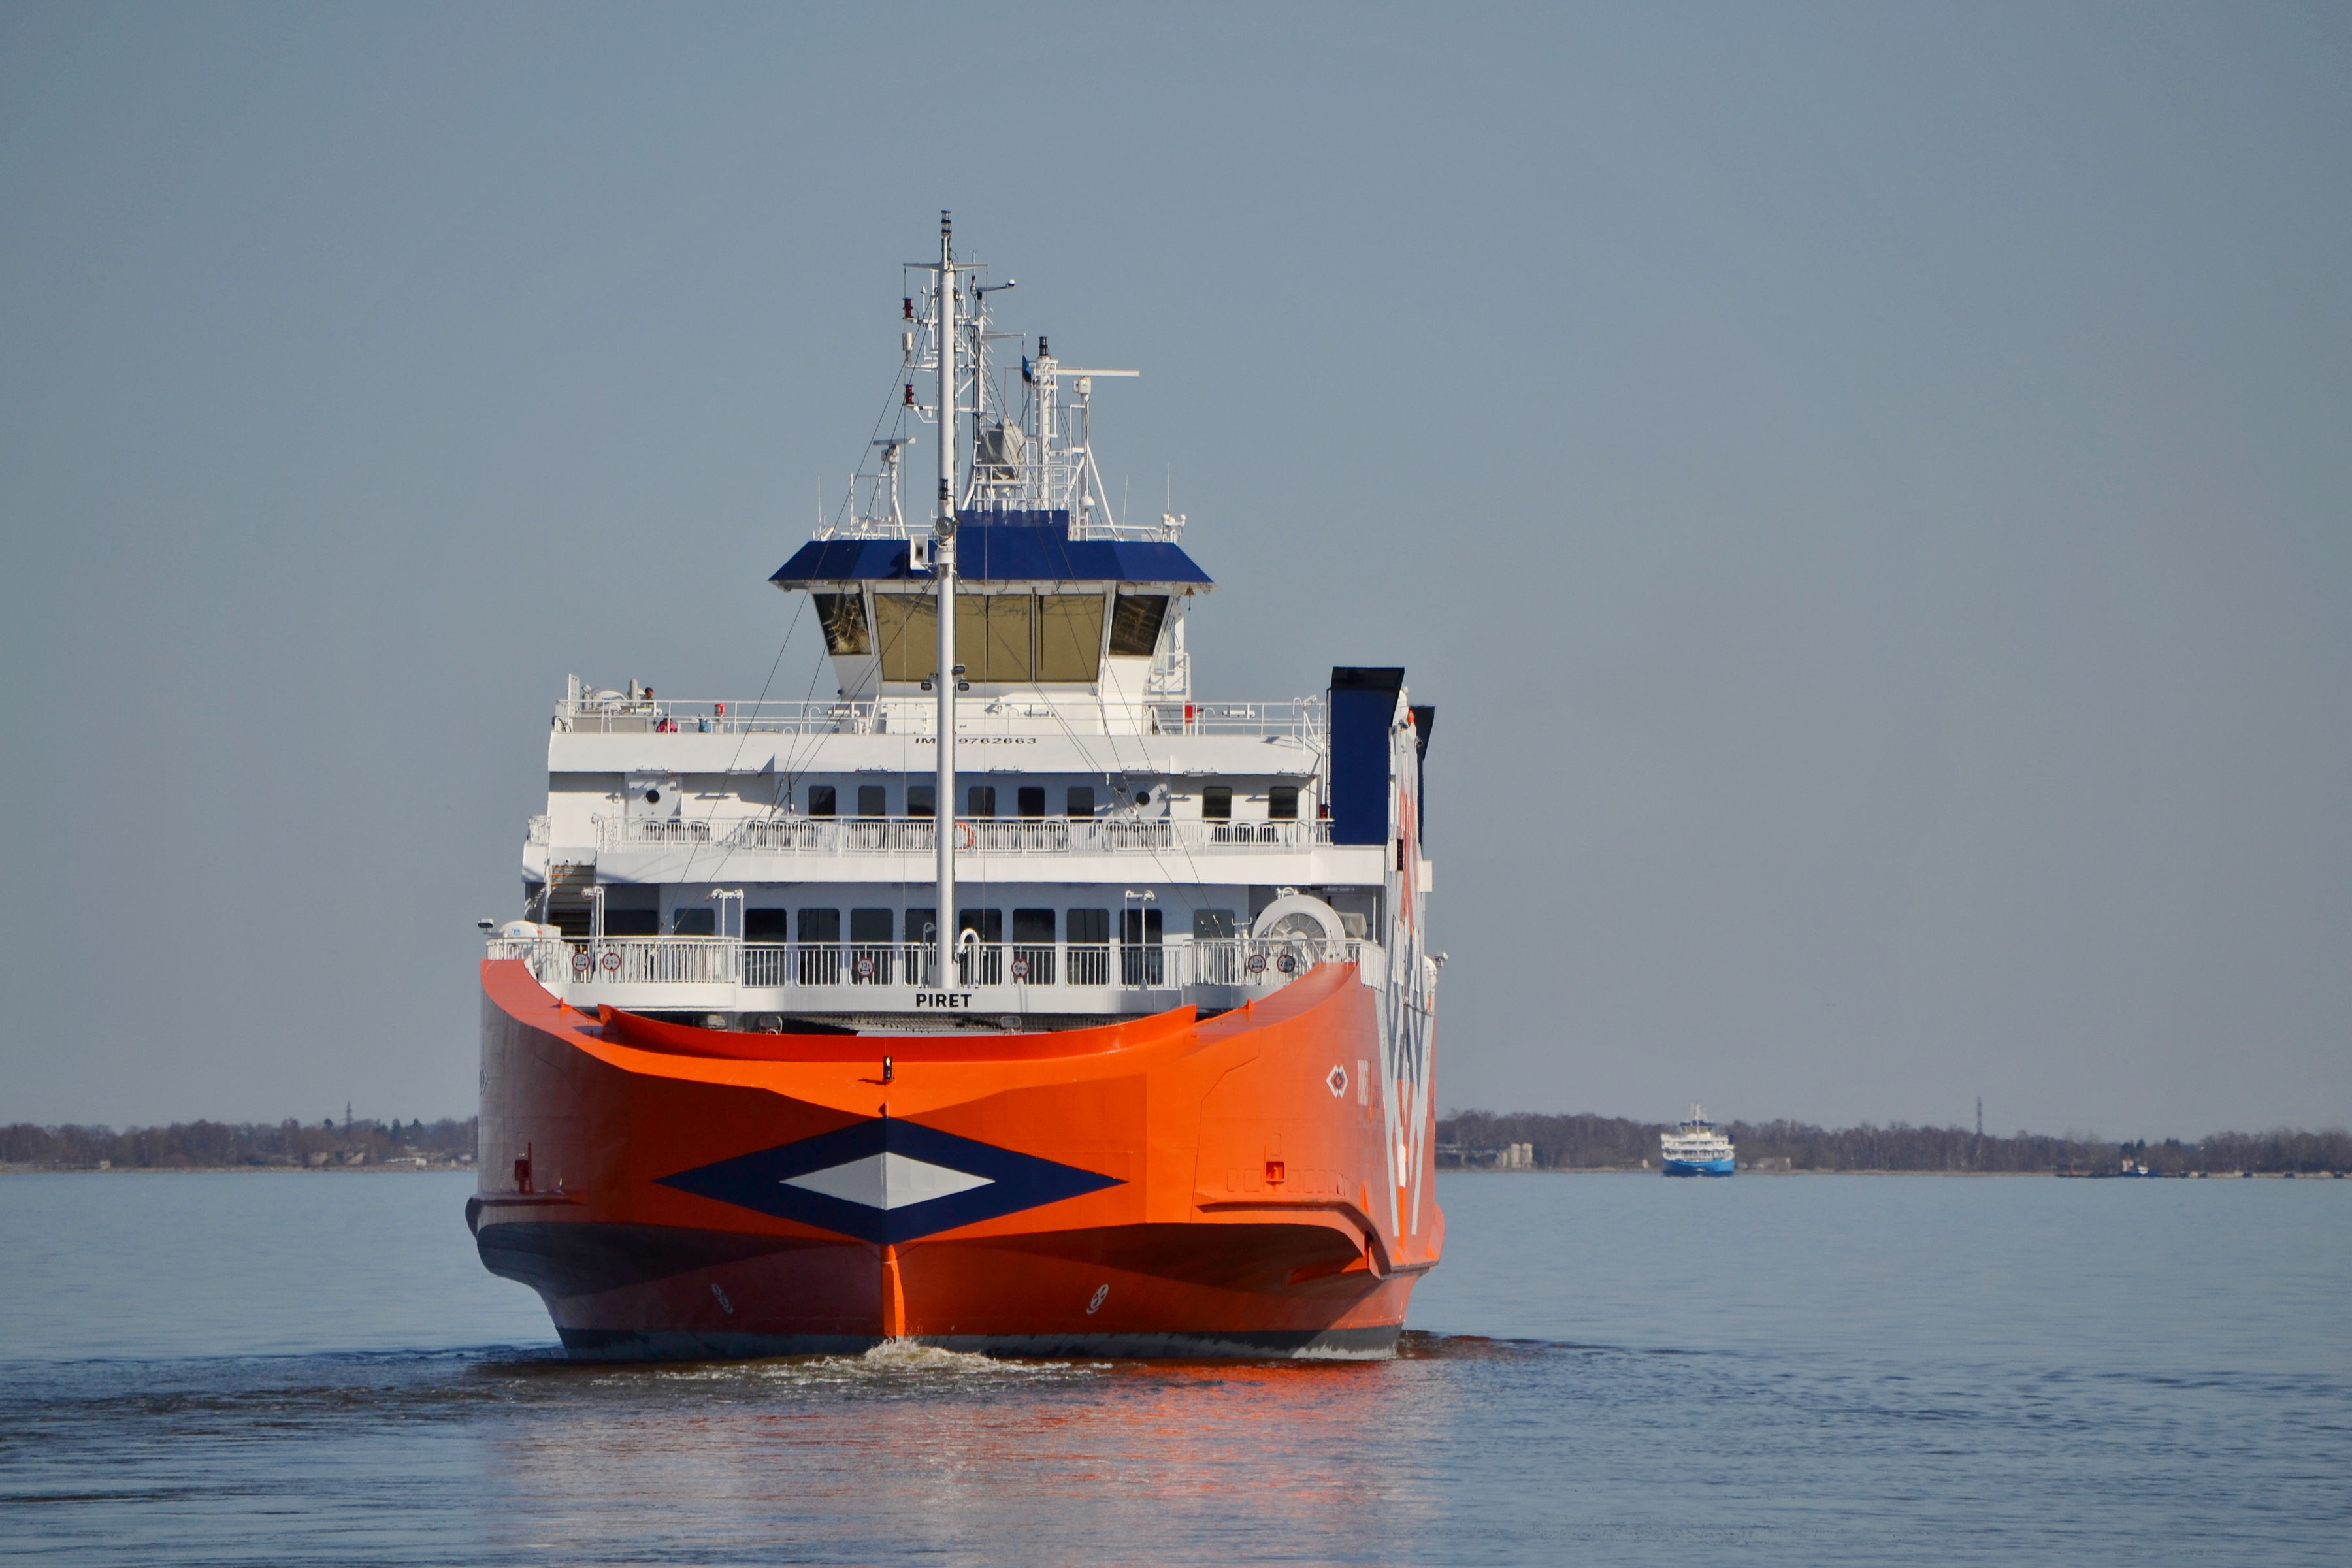 The ferry between Saaremaa and the mainland